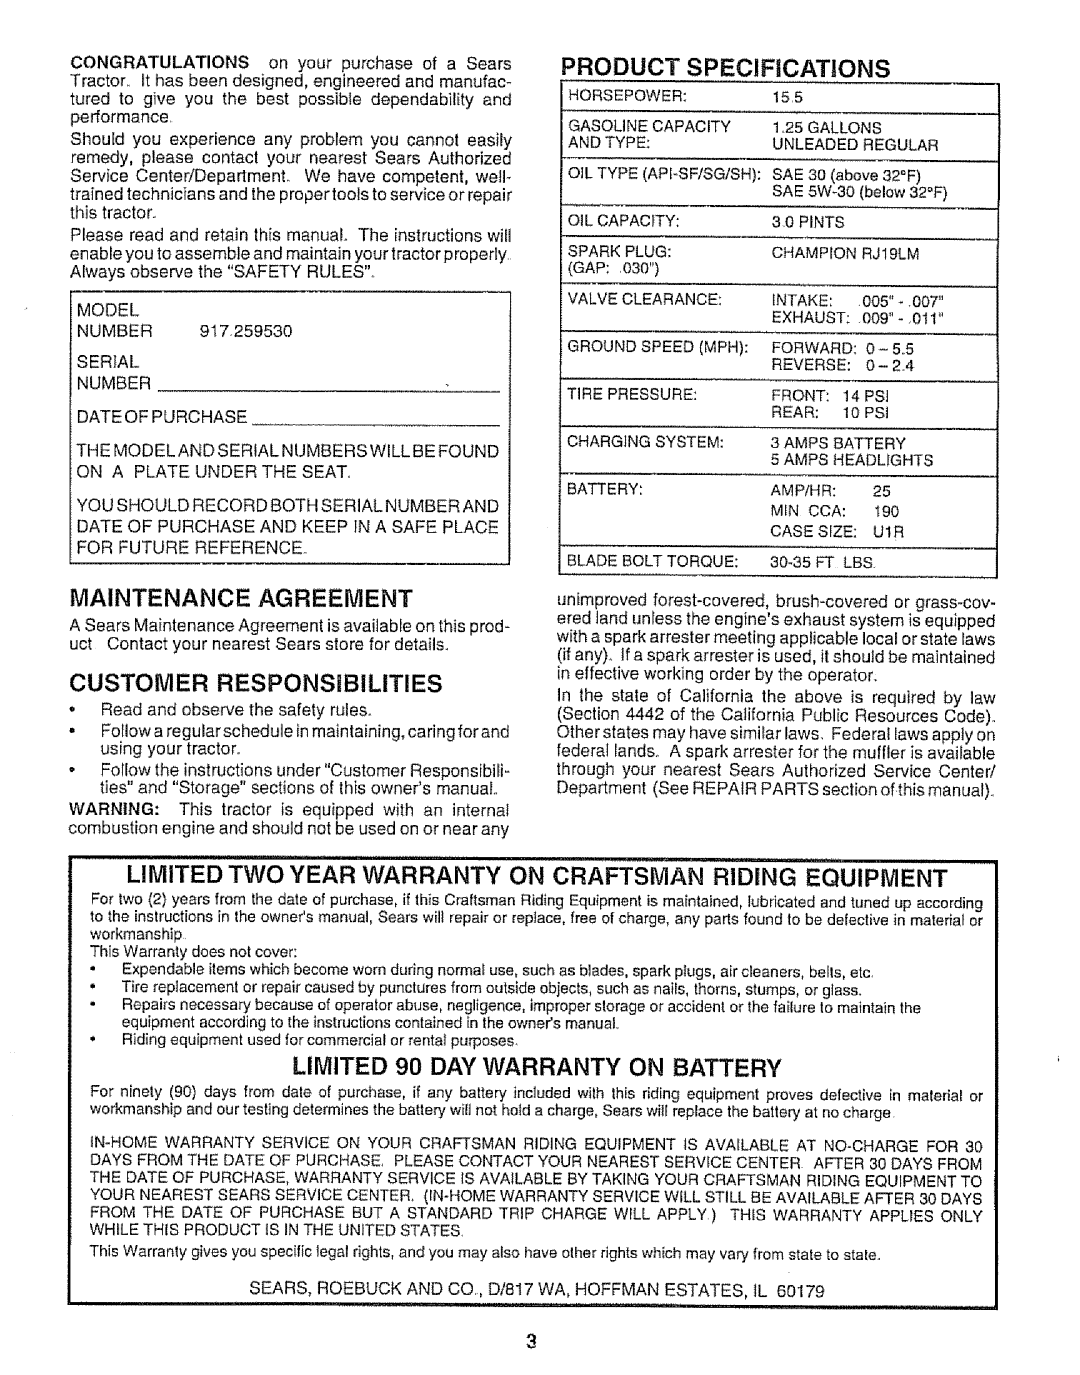 Sears 917.25953 owner manual Product Specifications, Maintenance Agreement, Customer Responsibilities 